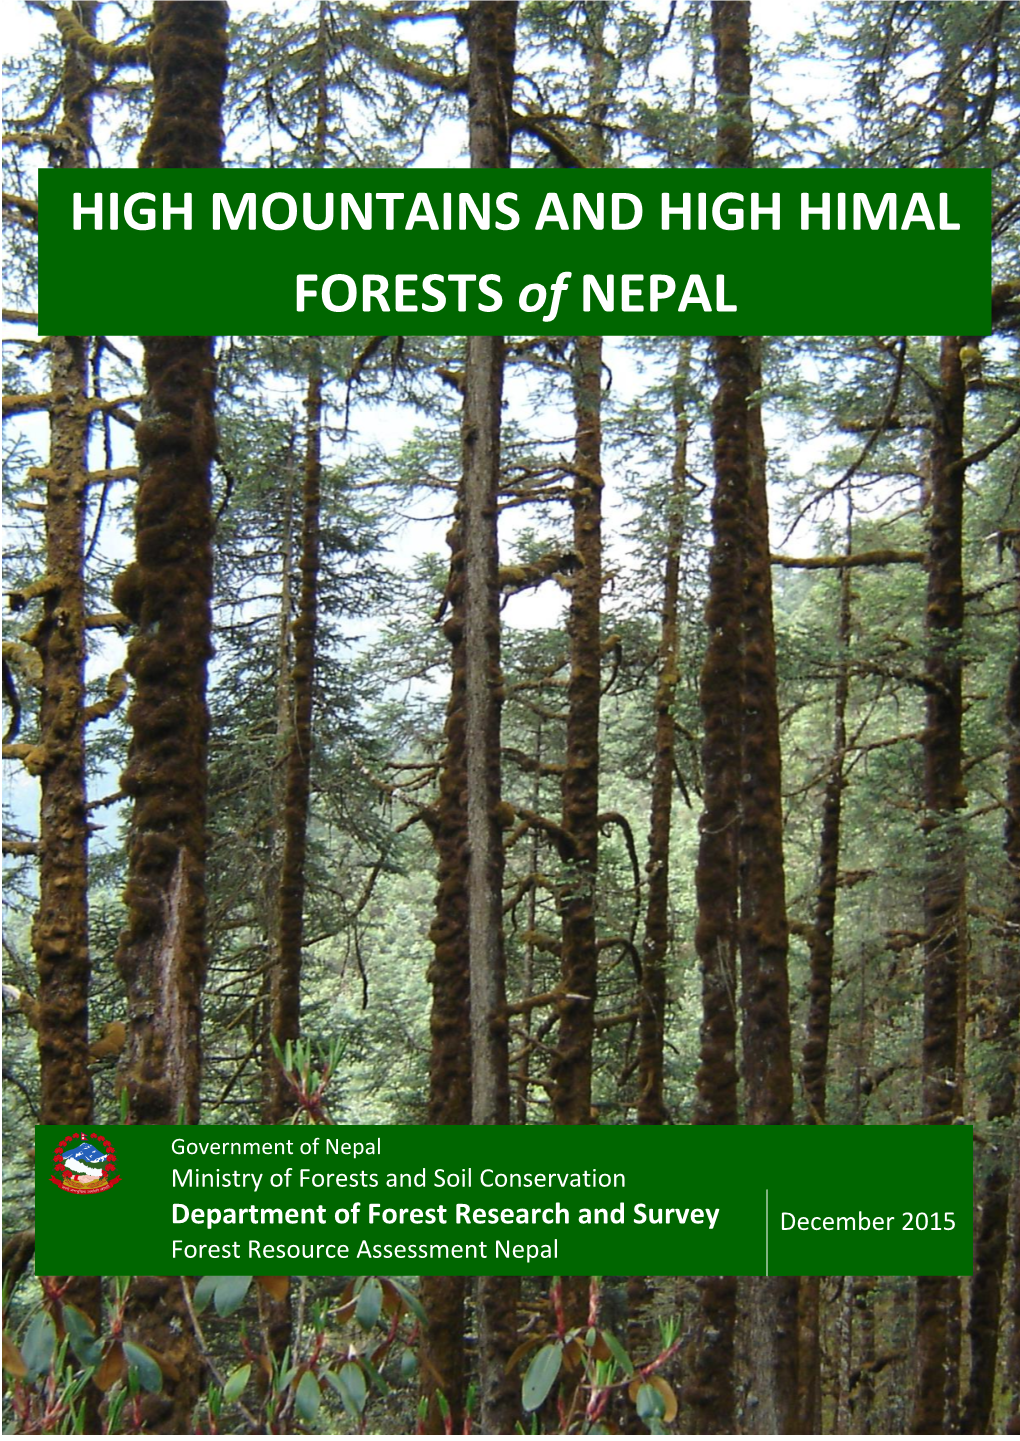 HIGH MOUNTAINS and HIGH HIMAL FORESTS of NEPAL